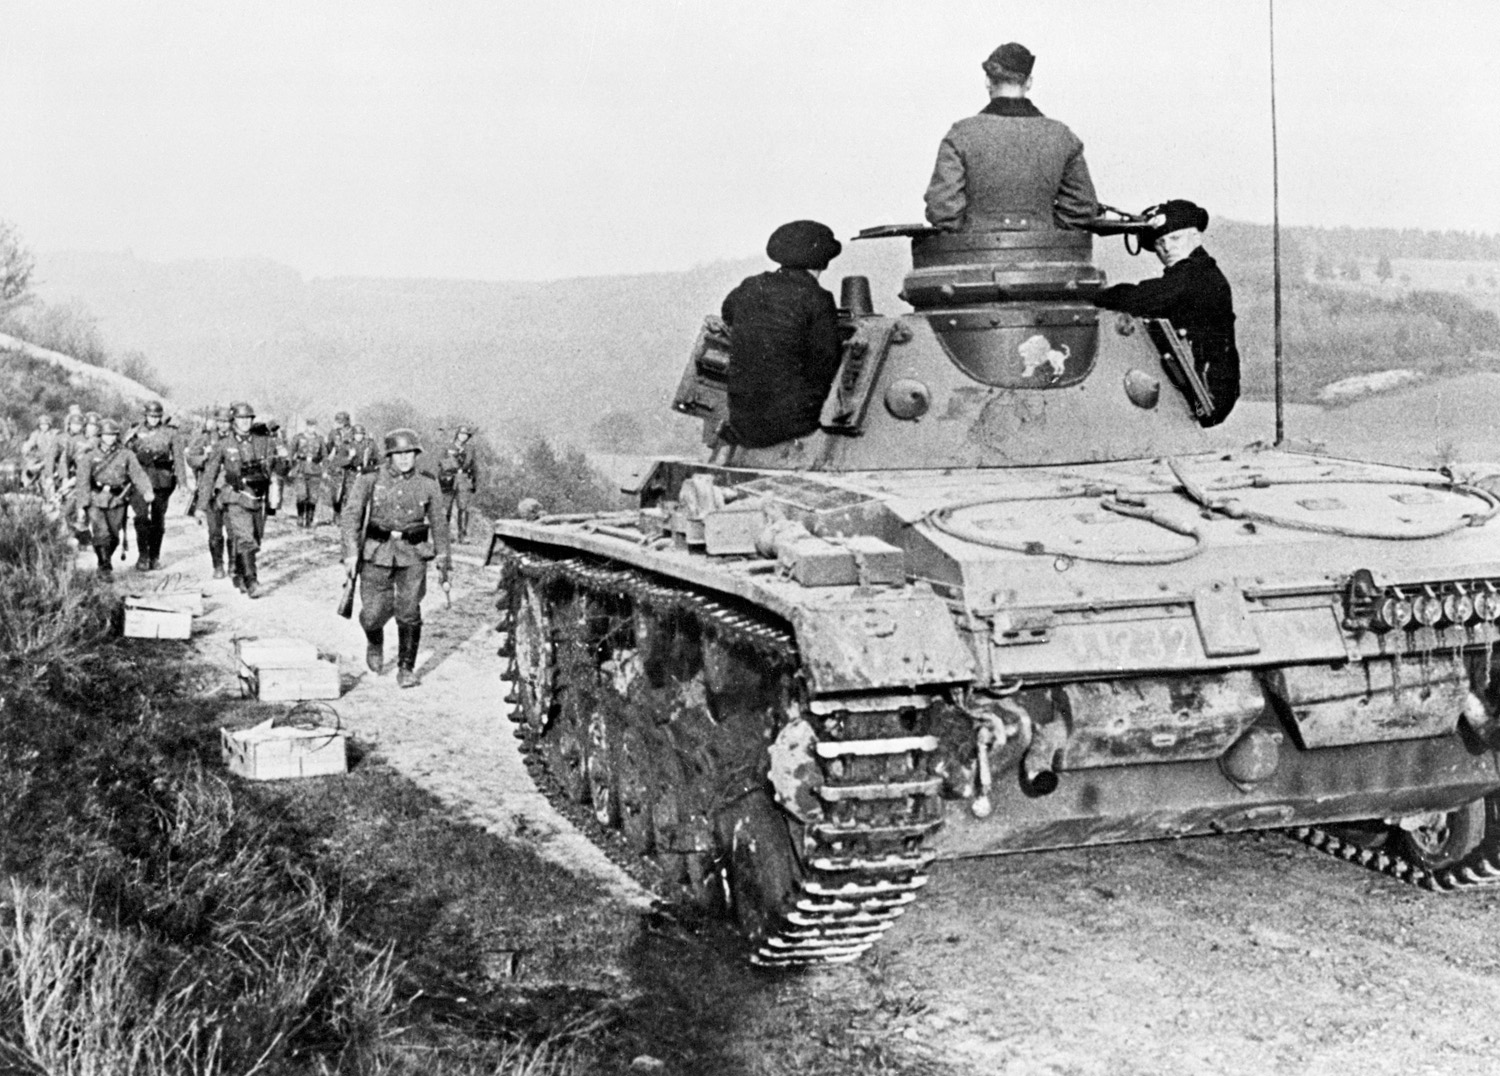 With a steady stream of infantry following behind, a German tank makes its way up a dusty French road.